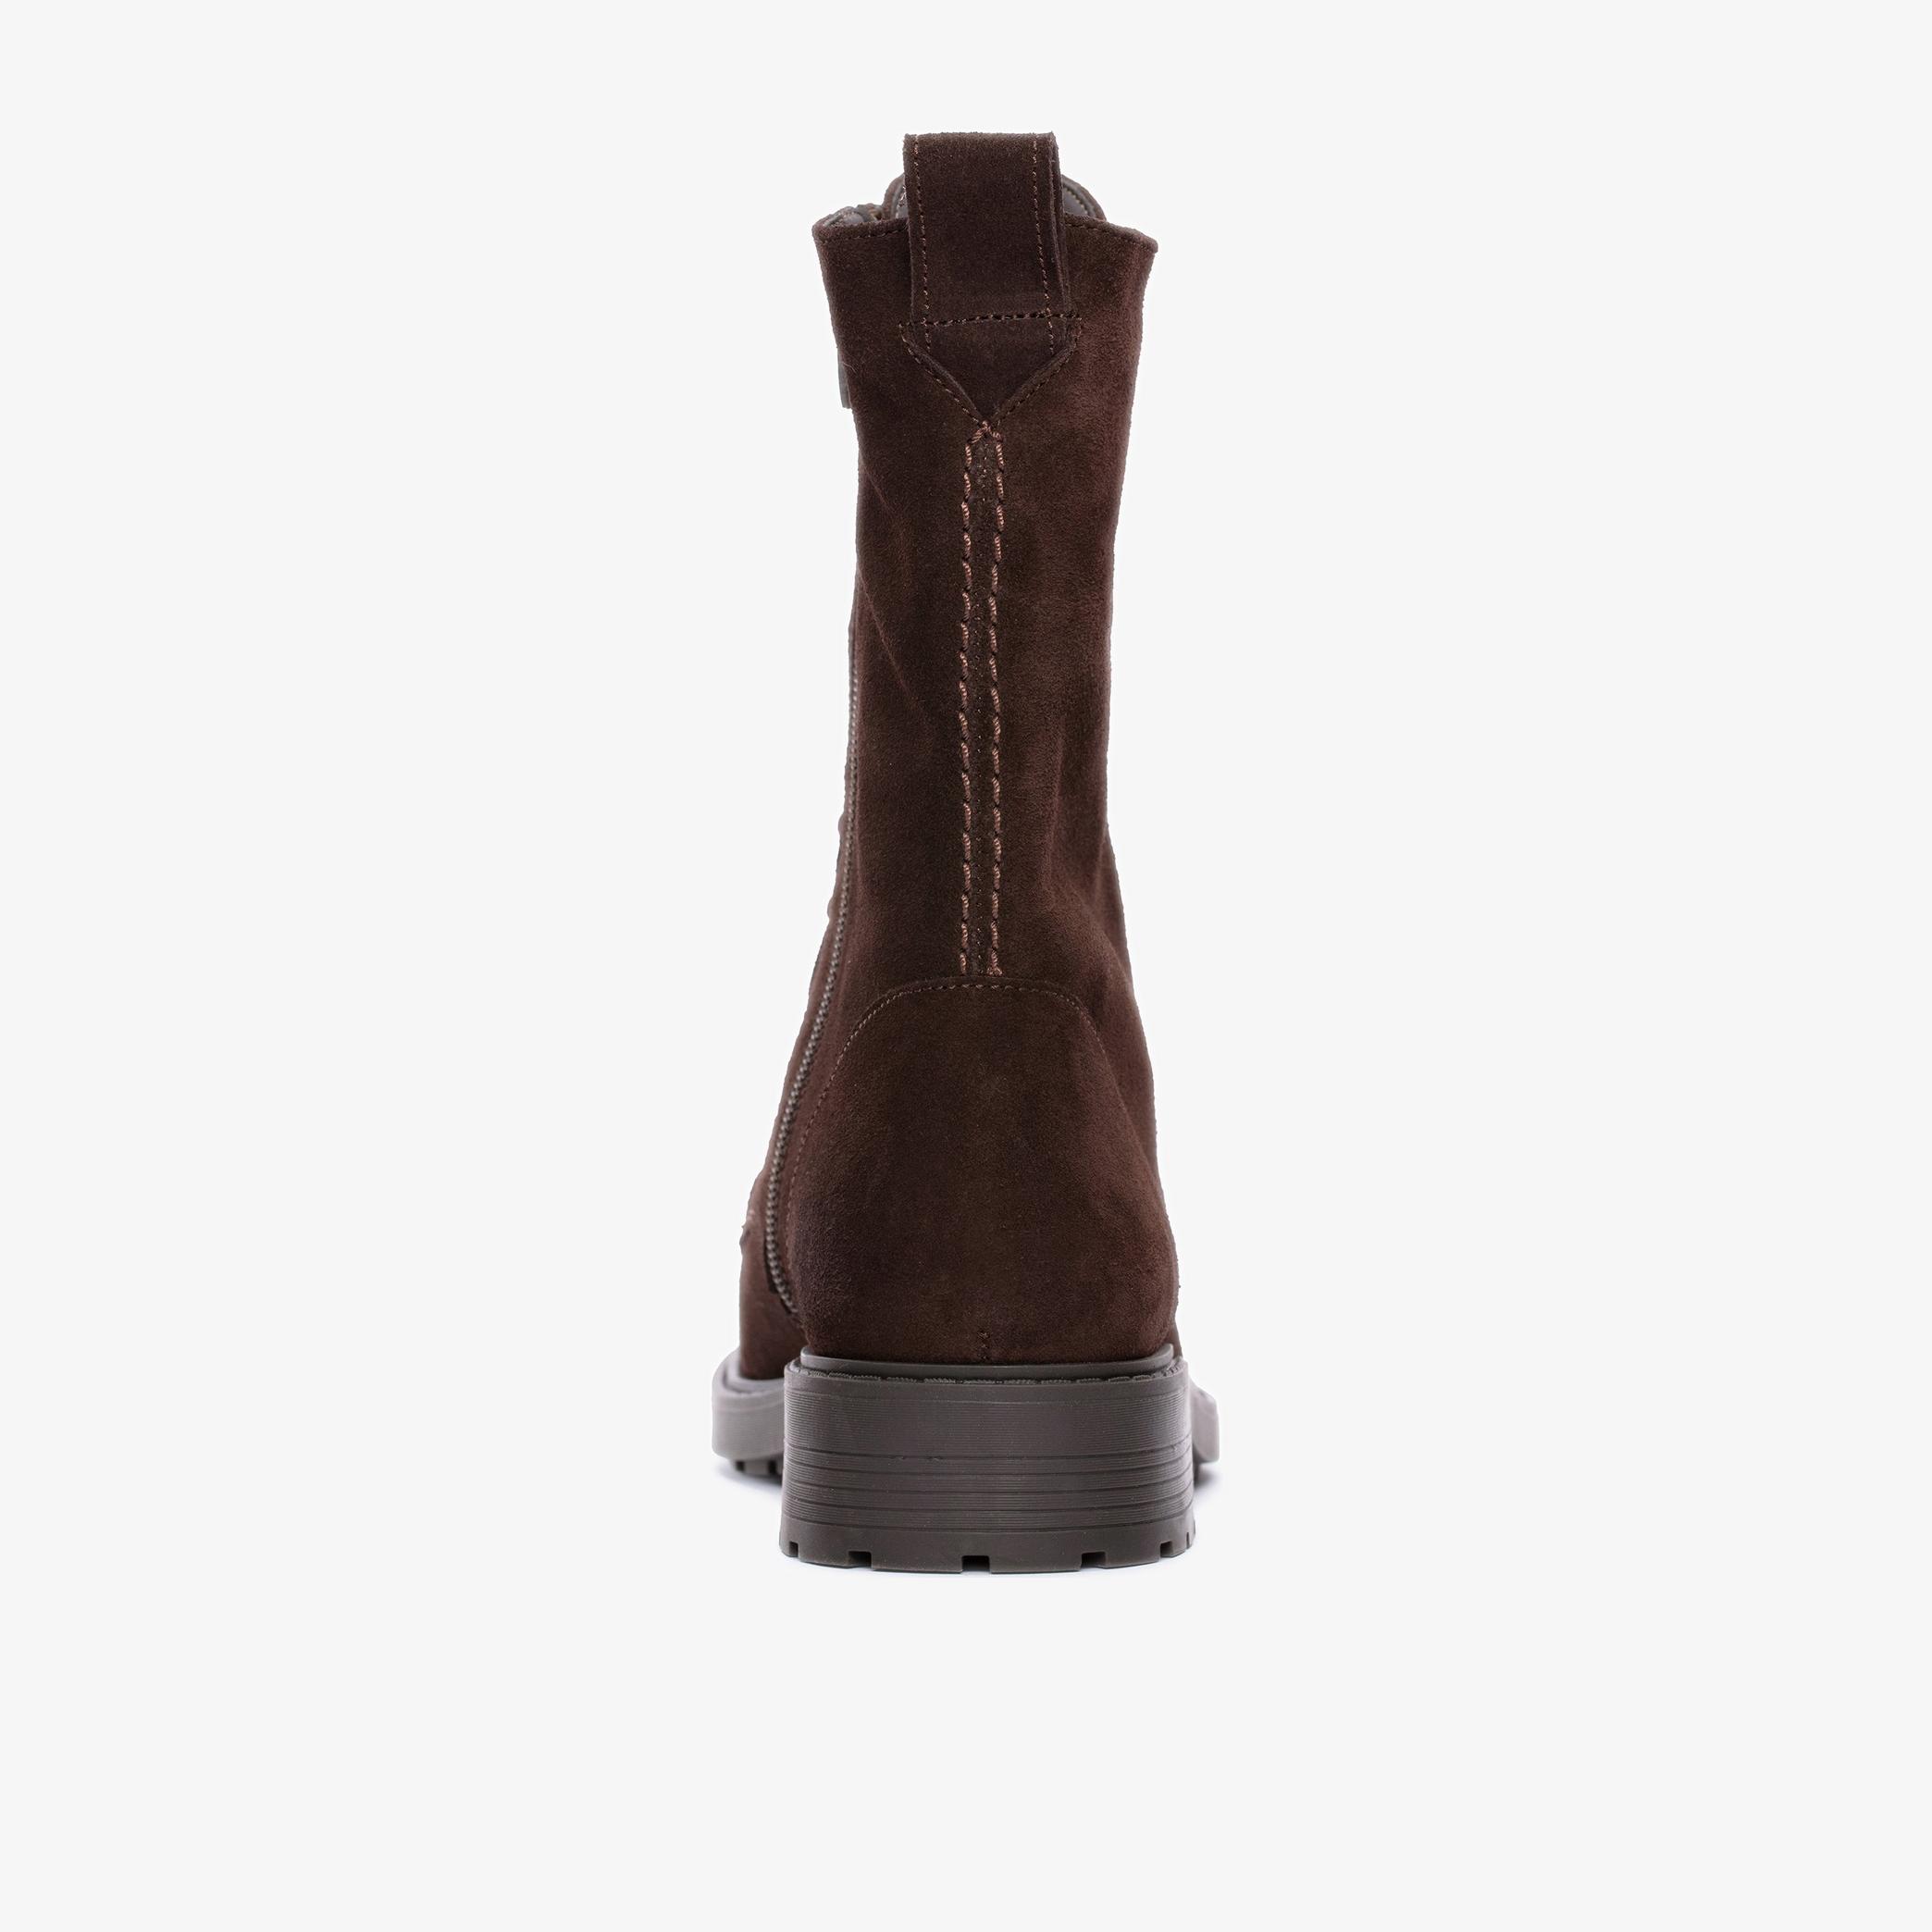 Orinoco2 Style Dark Brown Suede Ankle Boots, view 5 of 6